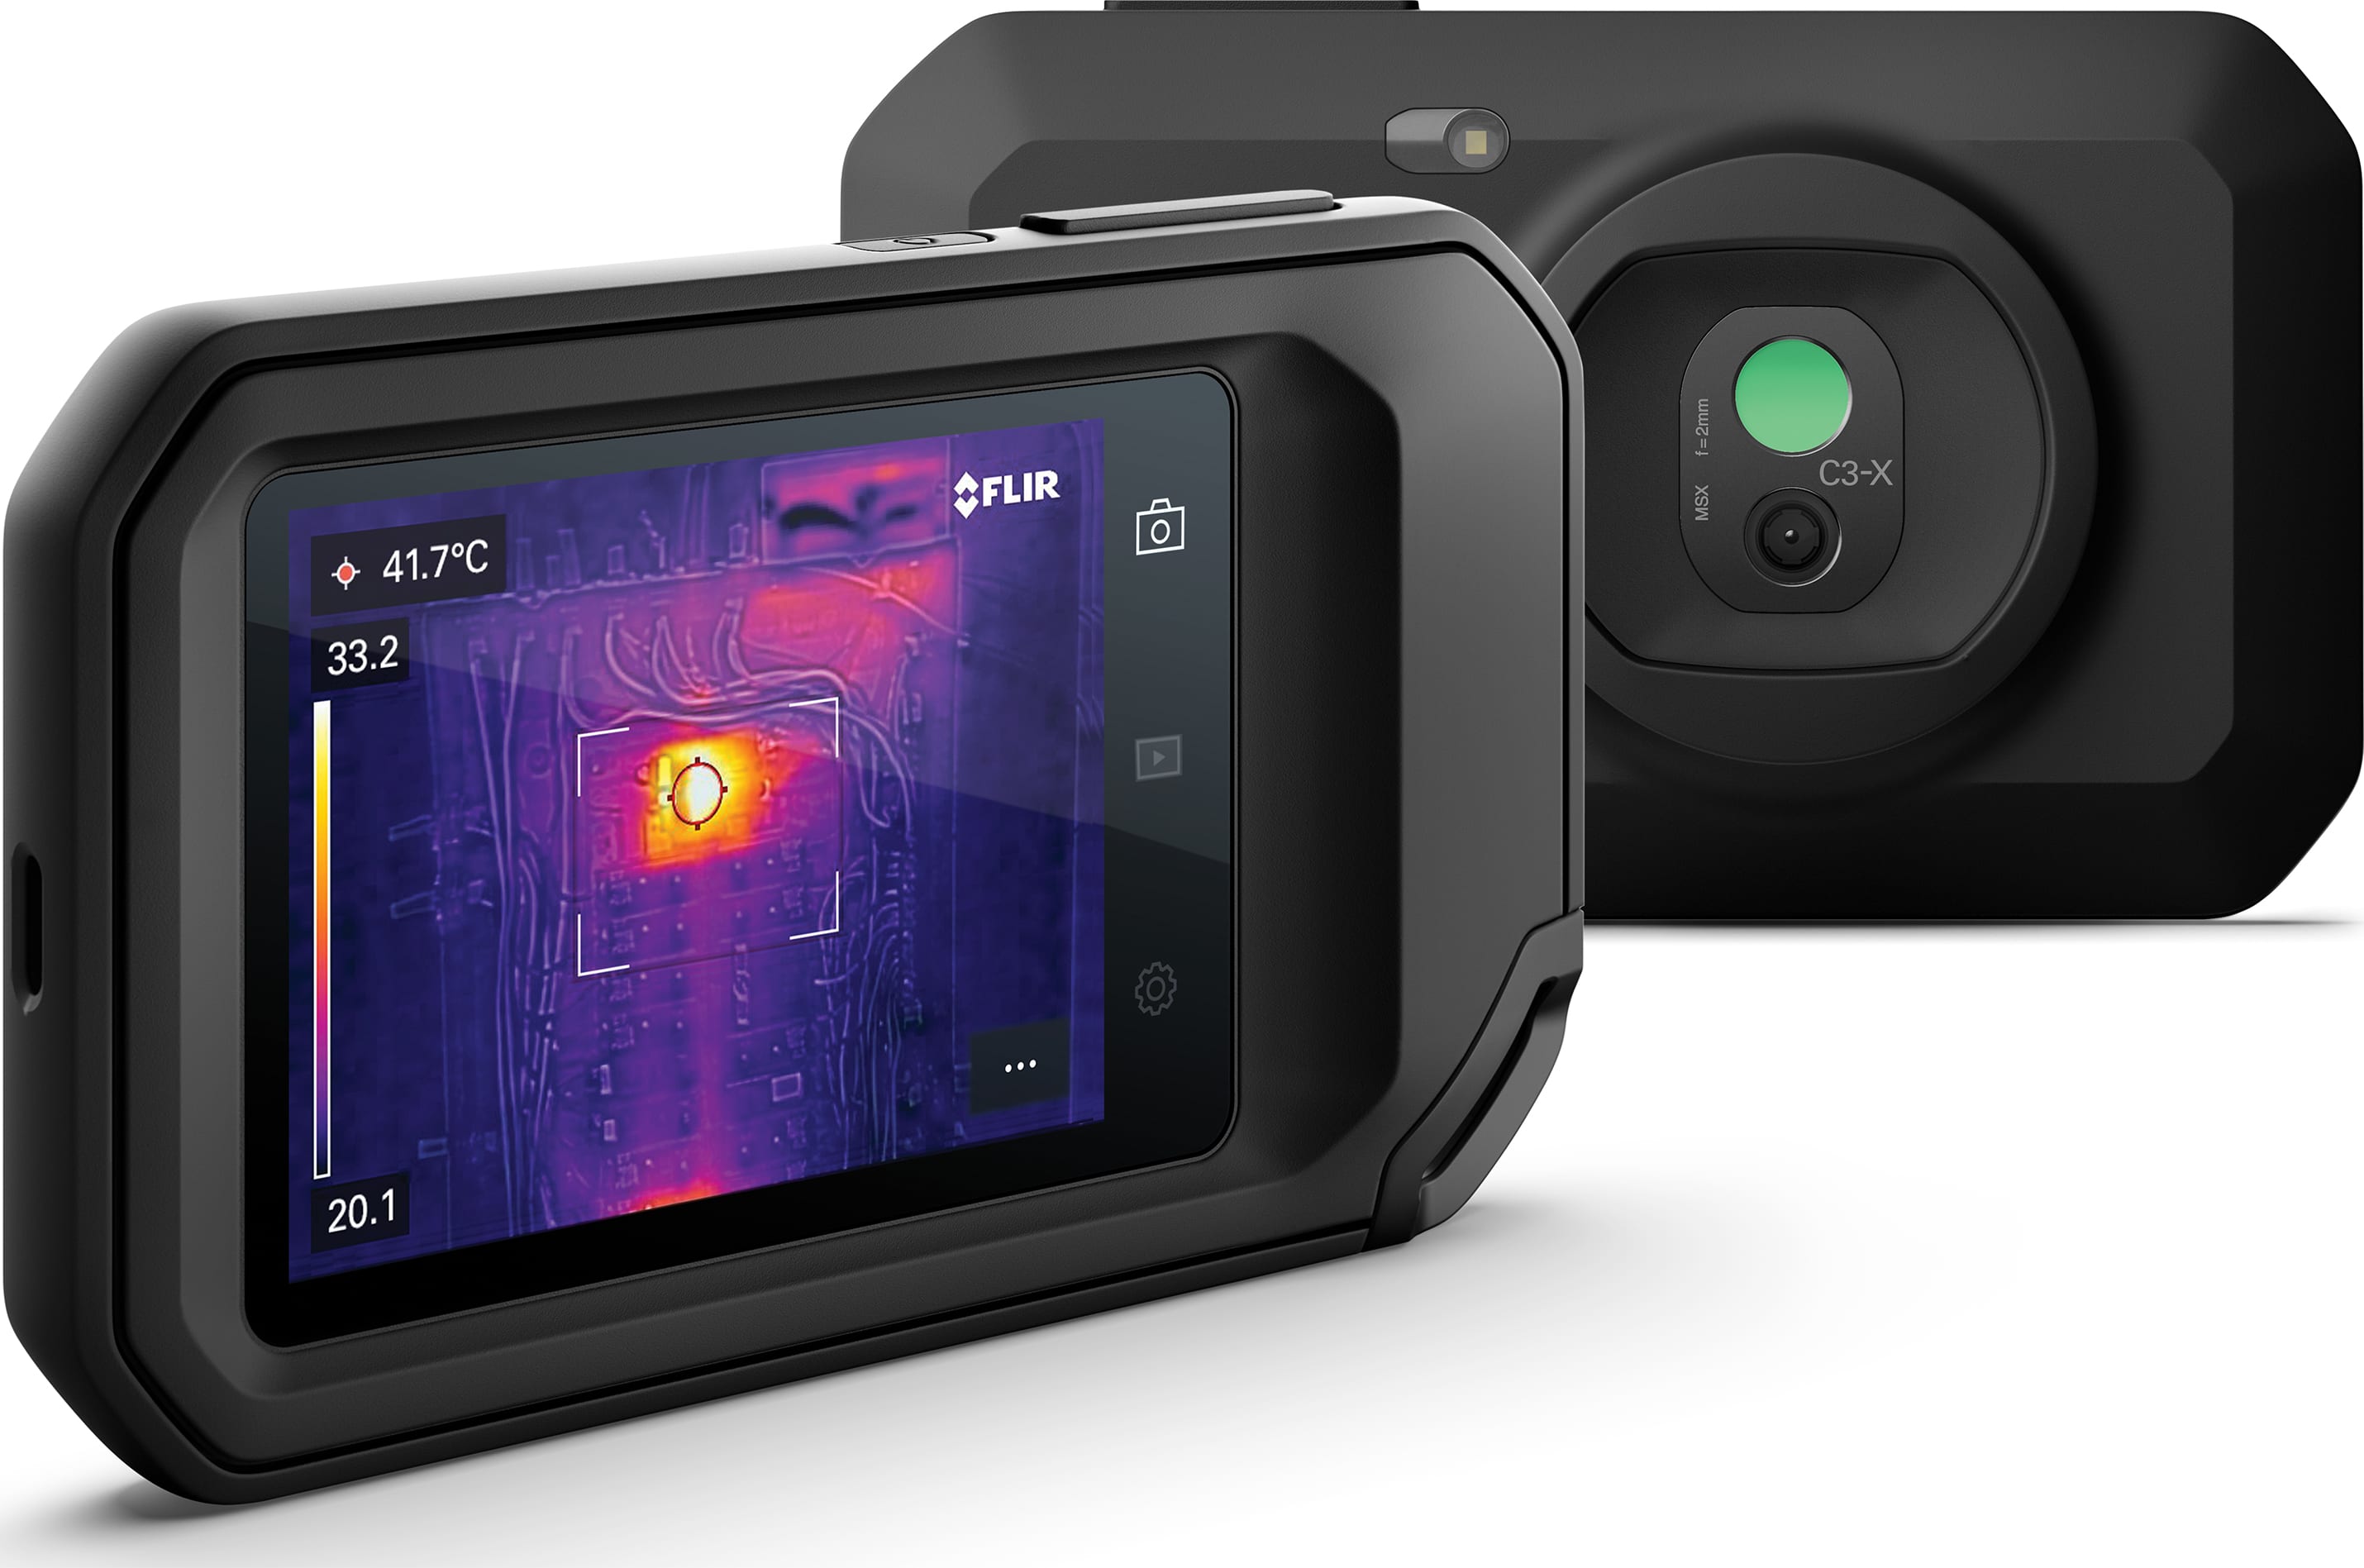 FLIR C3-X NON-WIFI - Compact Thermal Camera without Wifi